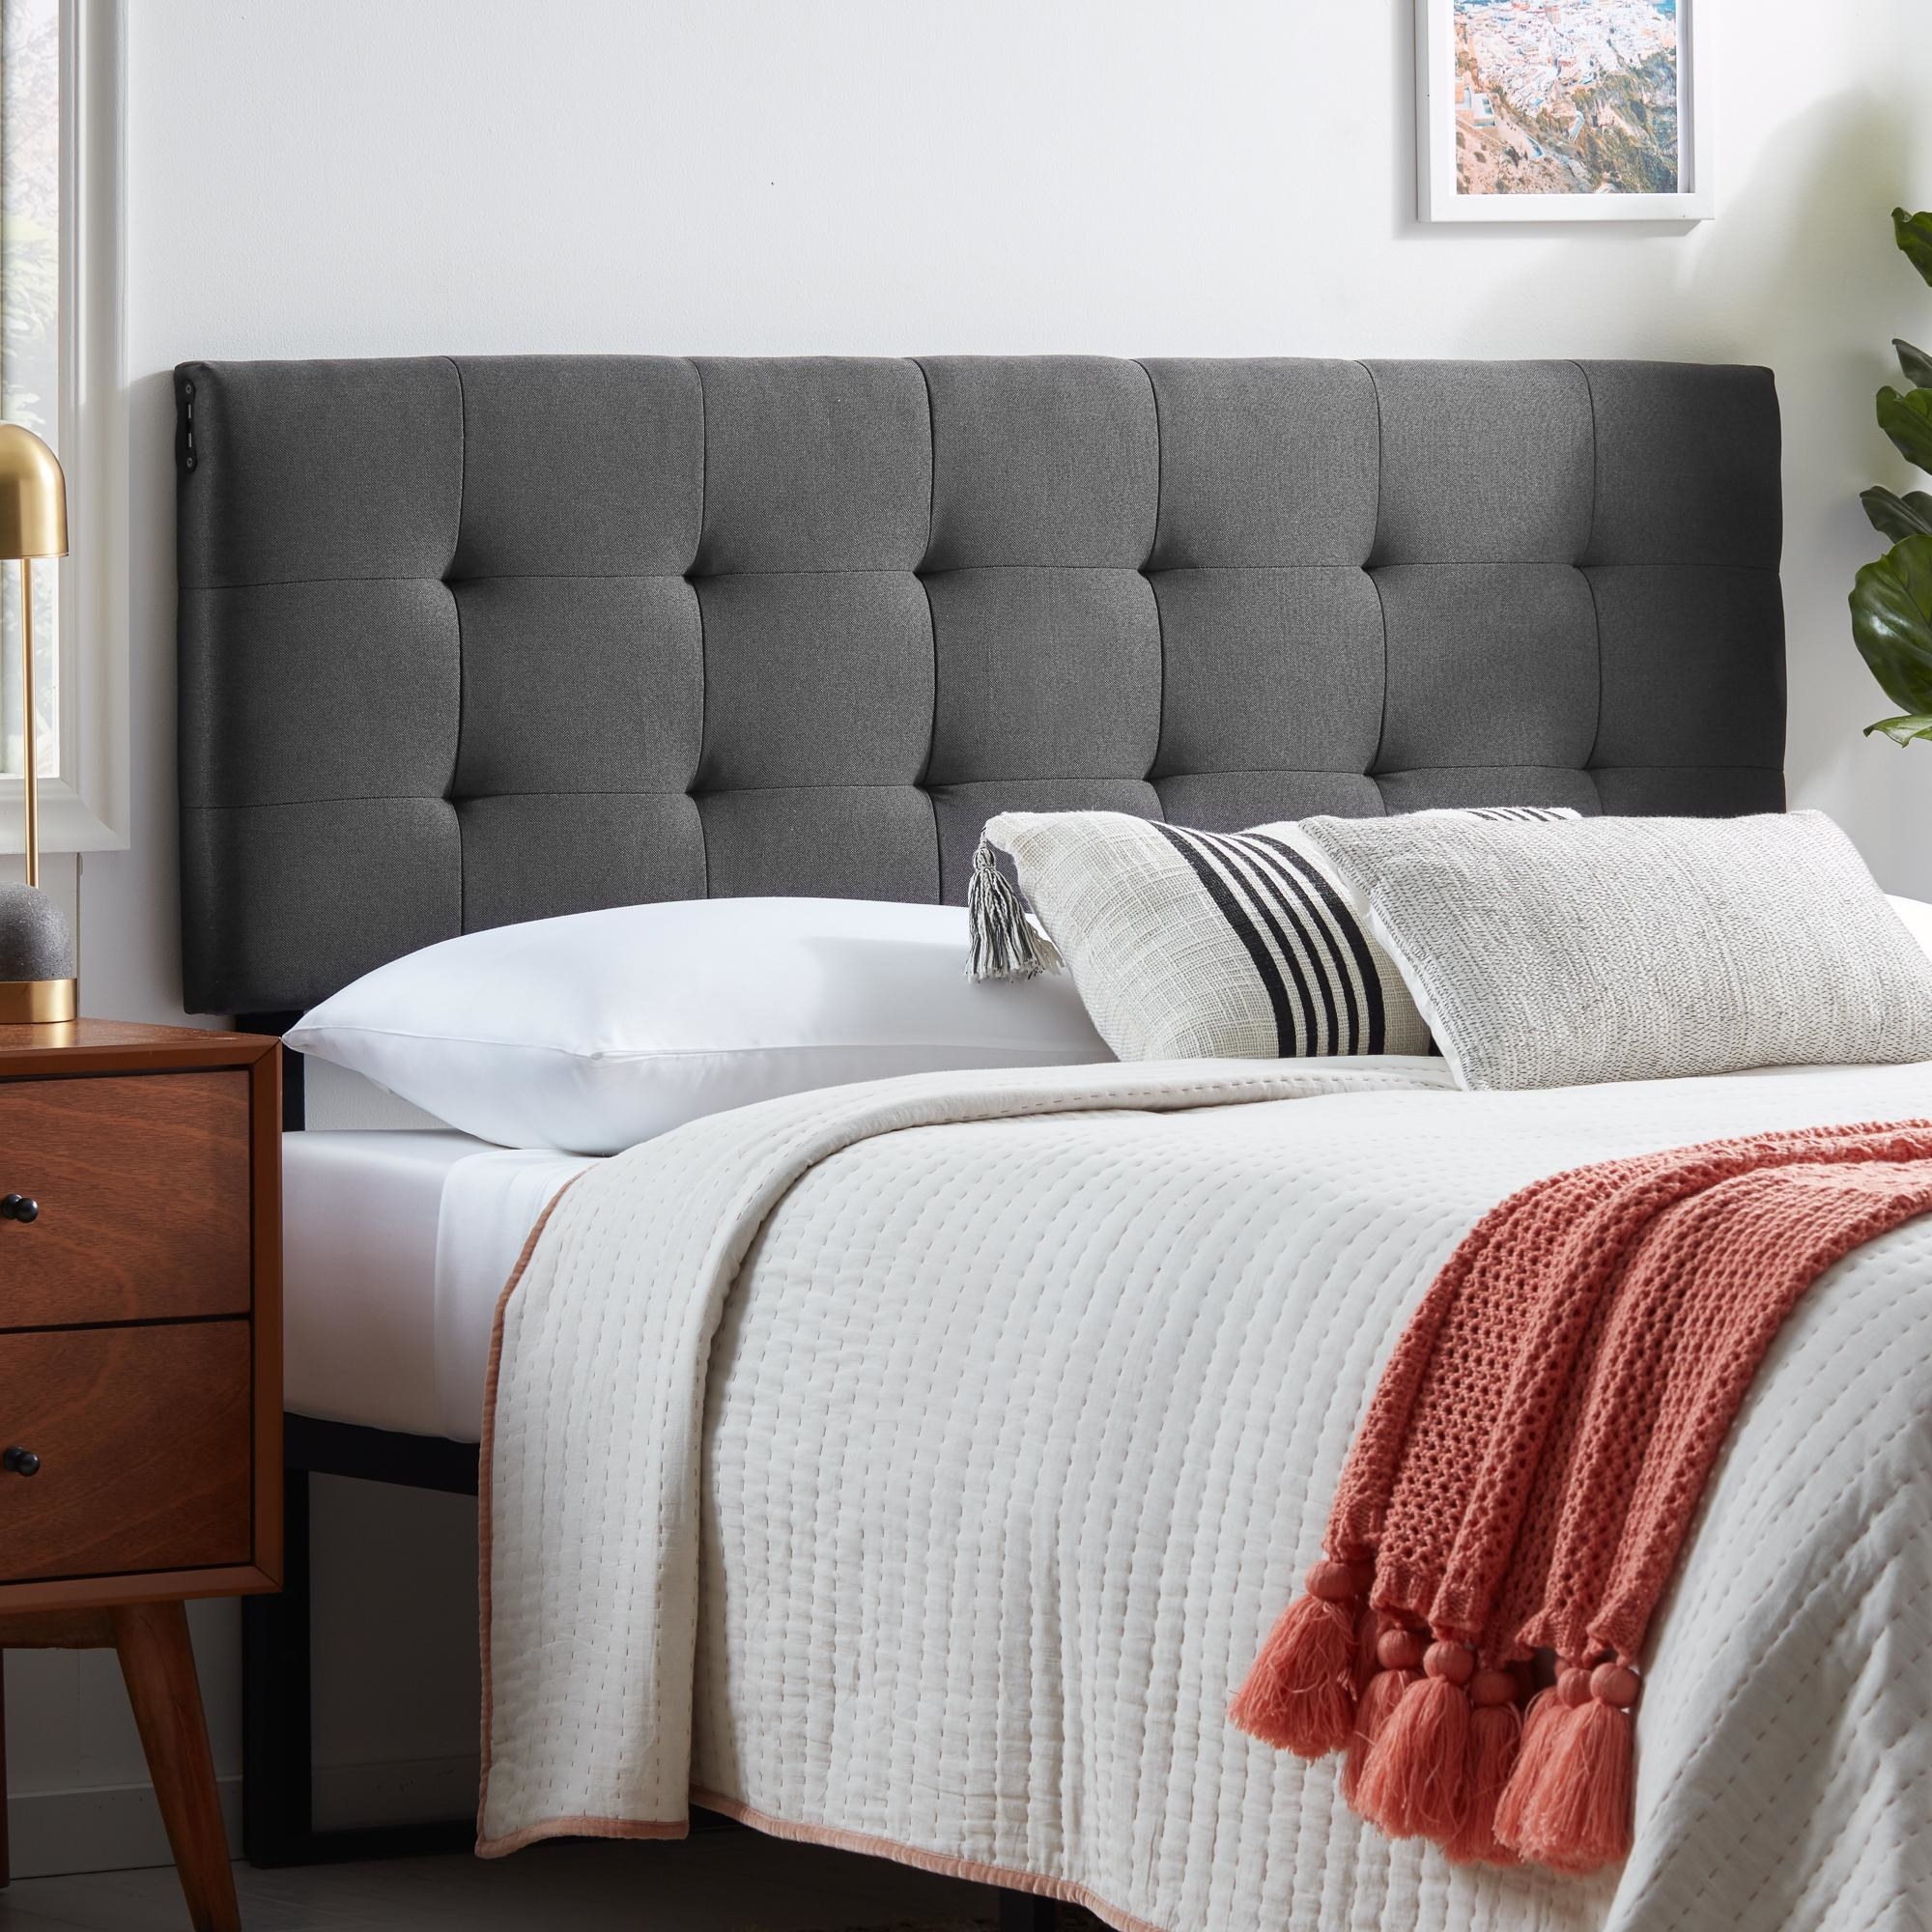 Headboard shown in color &quot;Charcoal&quot;.